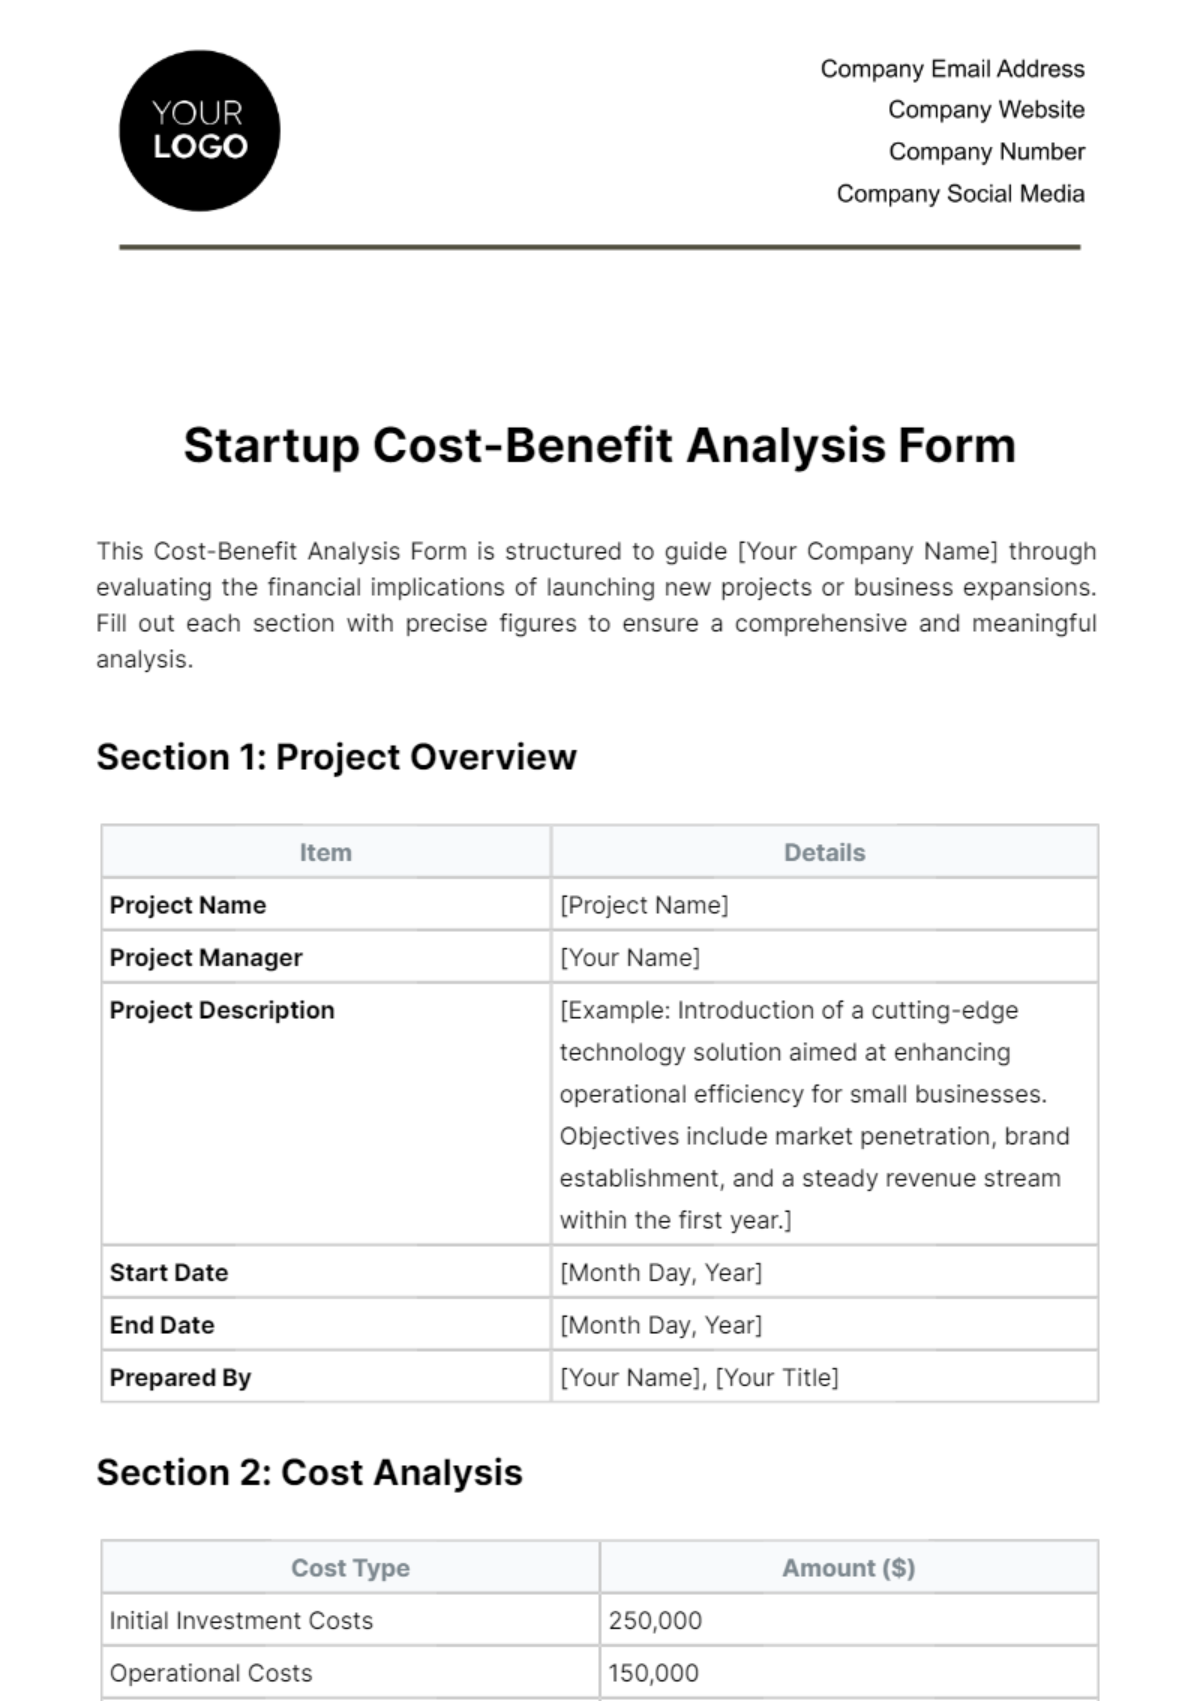 Startup Cost-Benefit Analysis Form Template